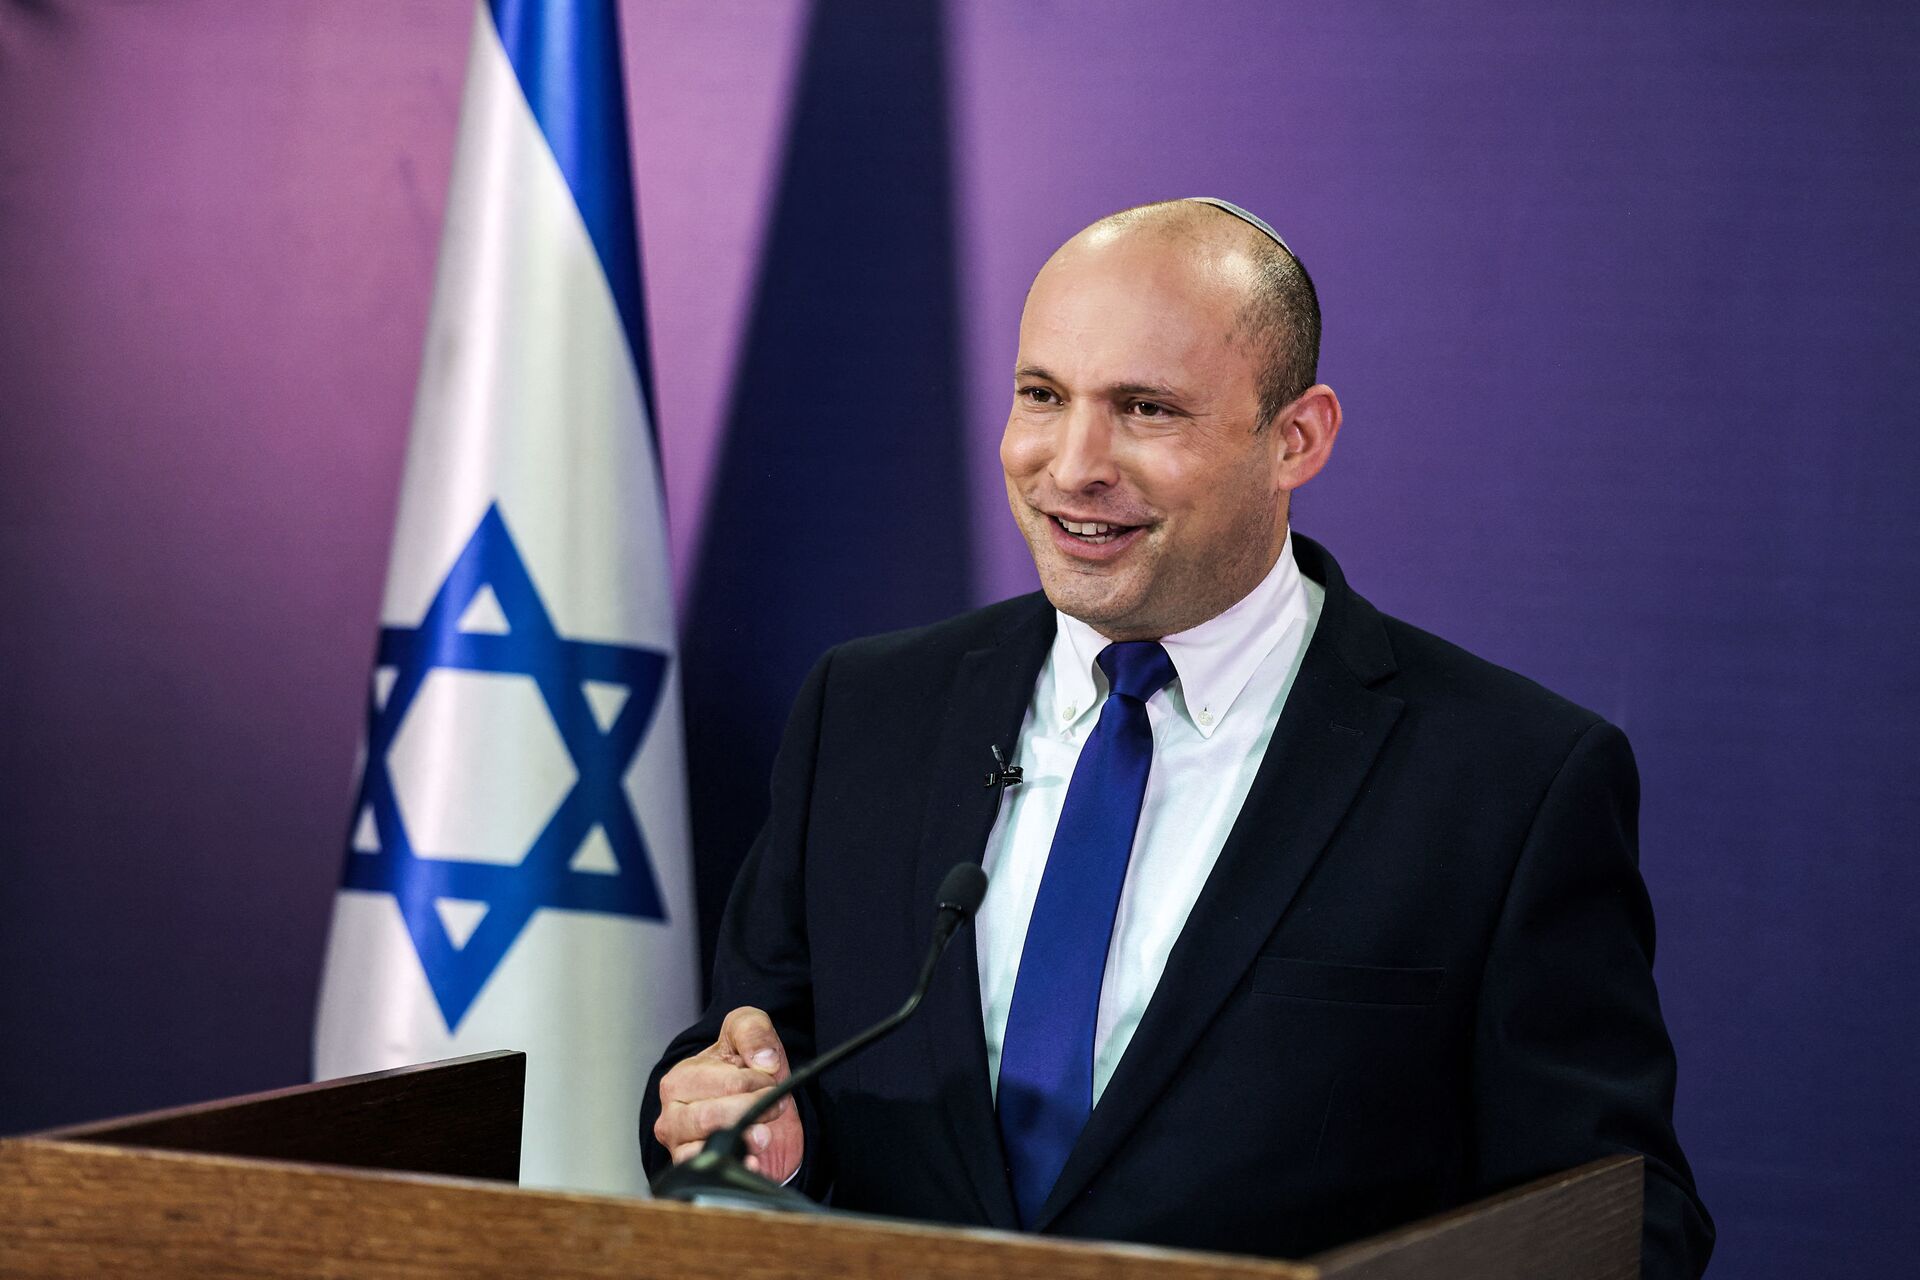 Naftali Bennett, Israeli parliament member from the Yamina party, gives a statement at the Knesset, Israel's parliament, in Jerusalem on June 6, 2021. - In power for 12 consecutive years, Israel's embattled Prime Minister Benjamin Netanyahu faces being toppled by a motley coalition of lawmakers united only by their shared hostility towards him. Under the agreement, the right-wing nationalist Bennett would be premier for two years, to be replaced by the centrist Yair Lapid of the Yesh Atid party in 2023. - Sputnik International, 1920, 07.09.2021